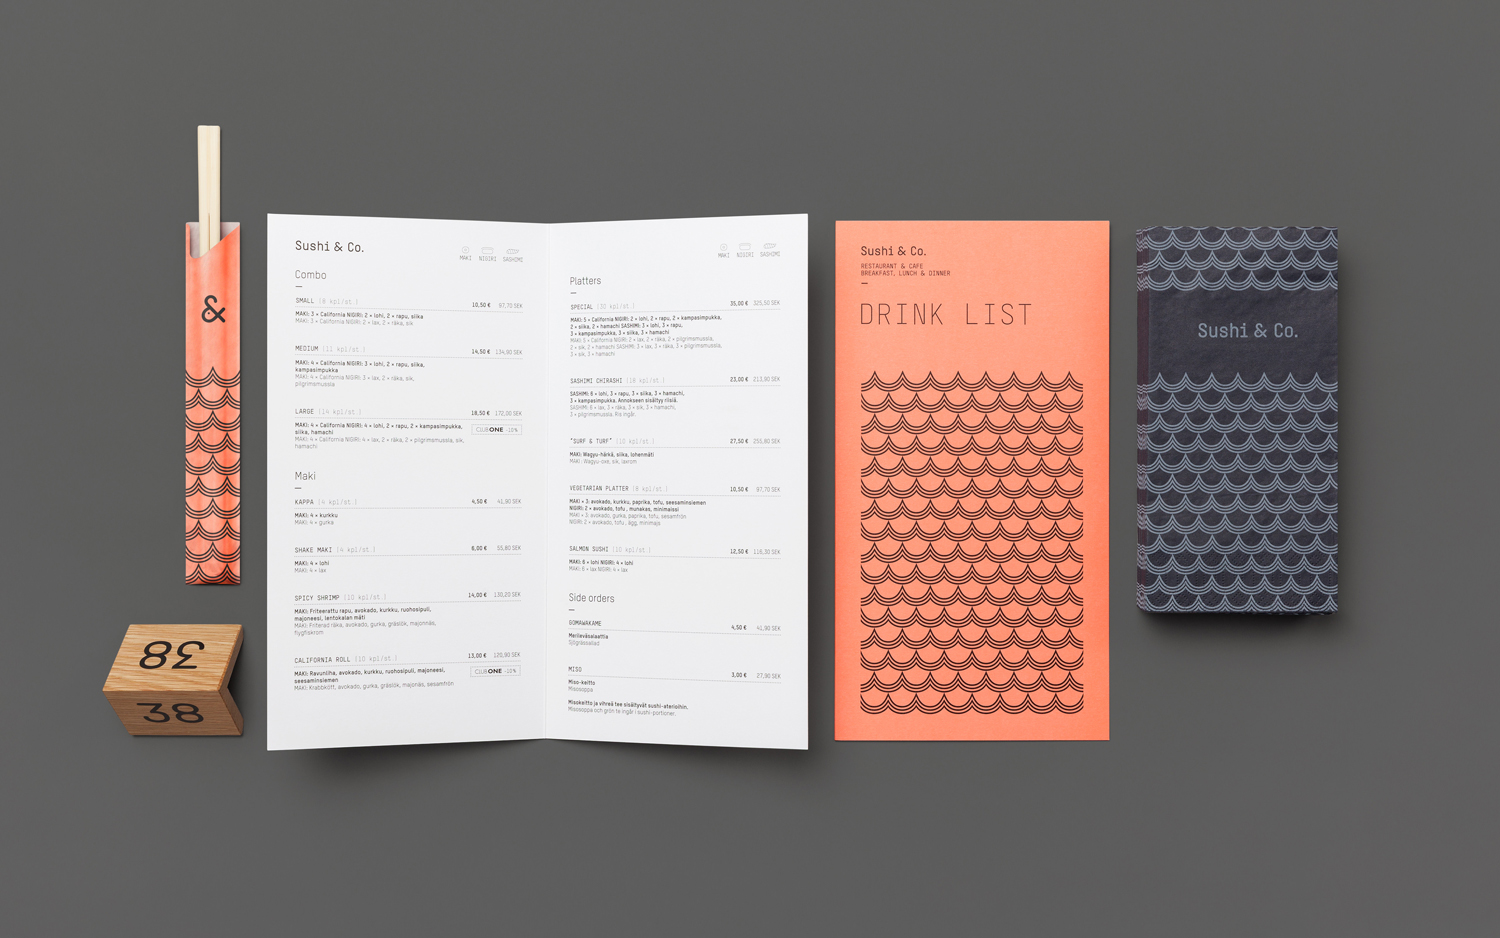 Visual identity and menus for Baltic Sea cruise ship restaurant Sushi & Co. designed by Bond